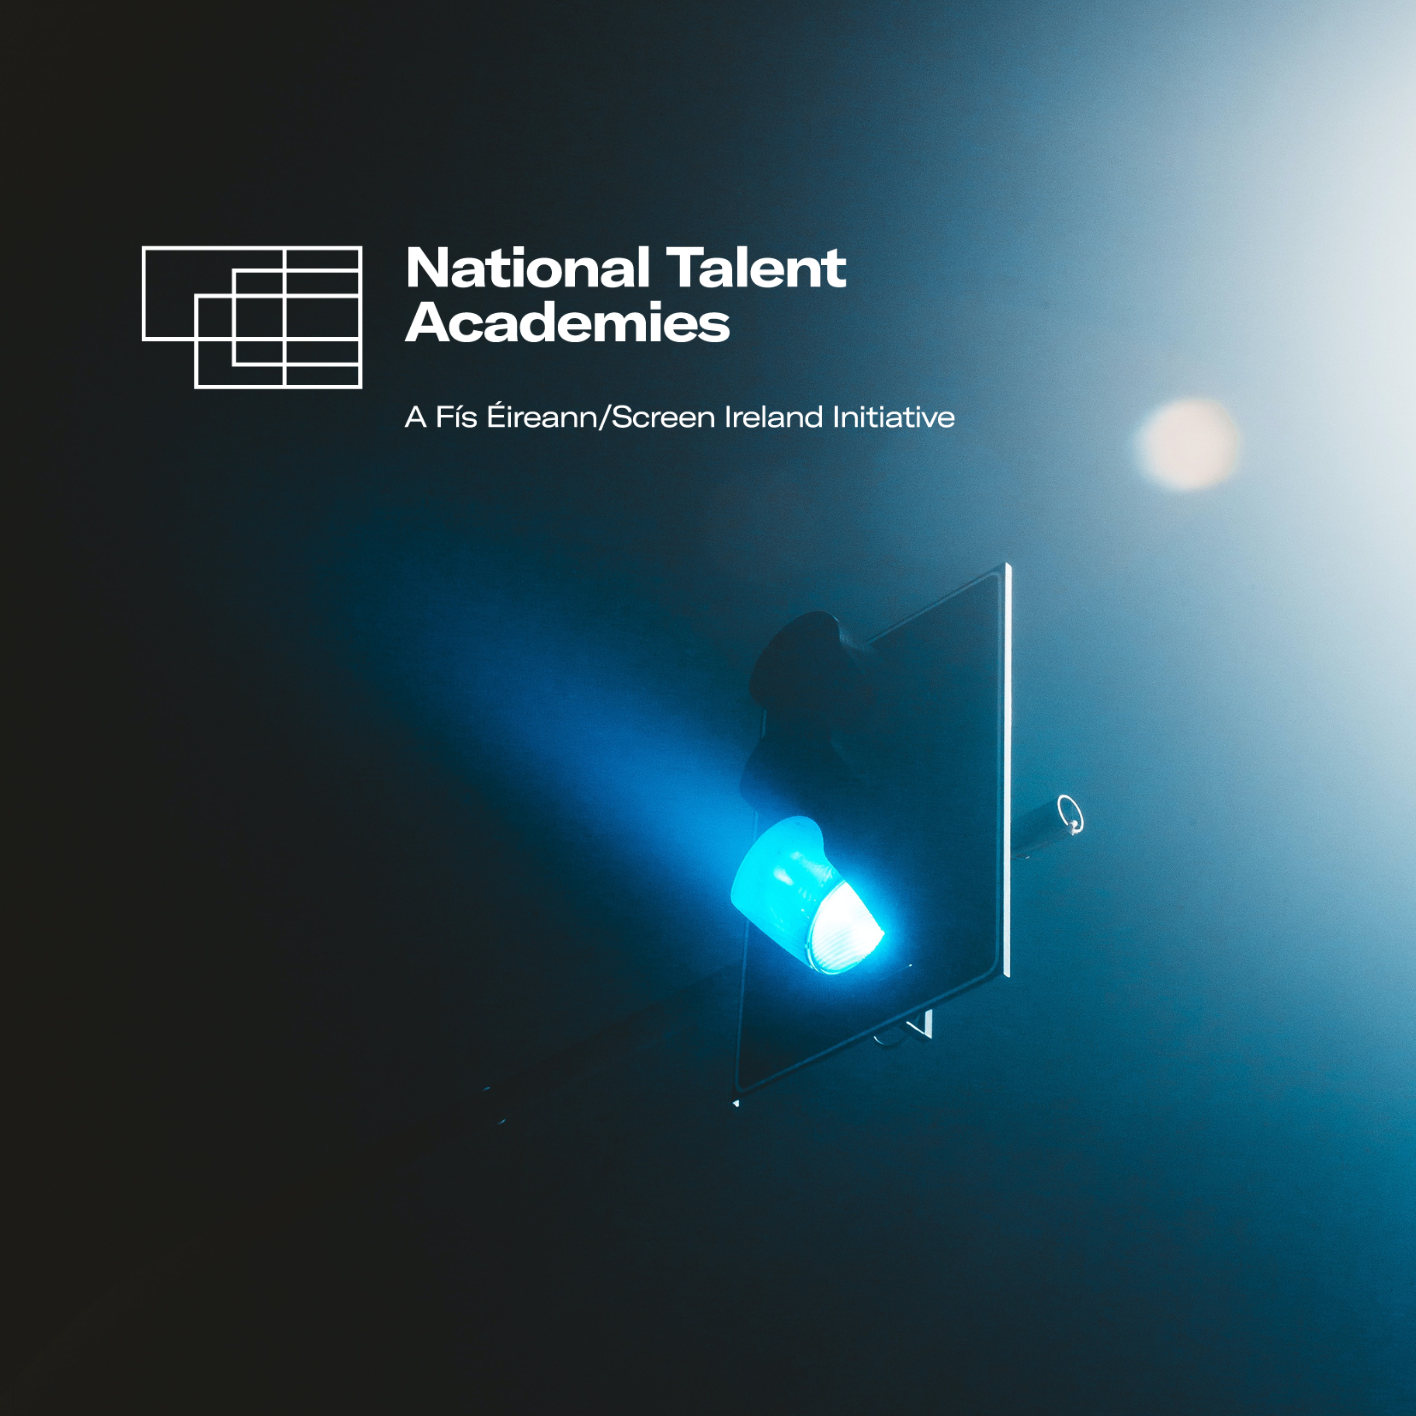 About the National Talent Academies